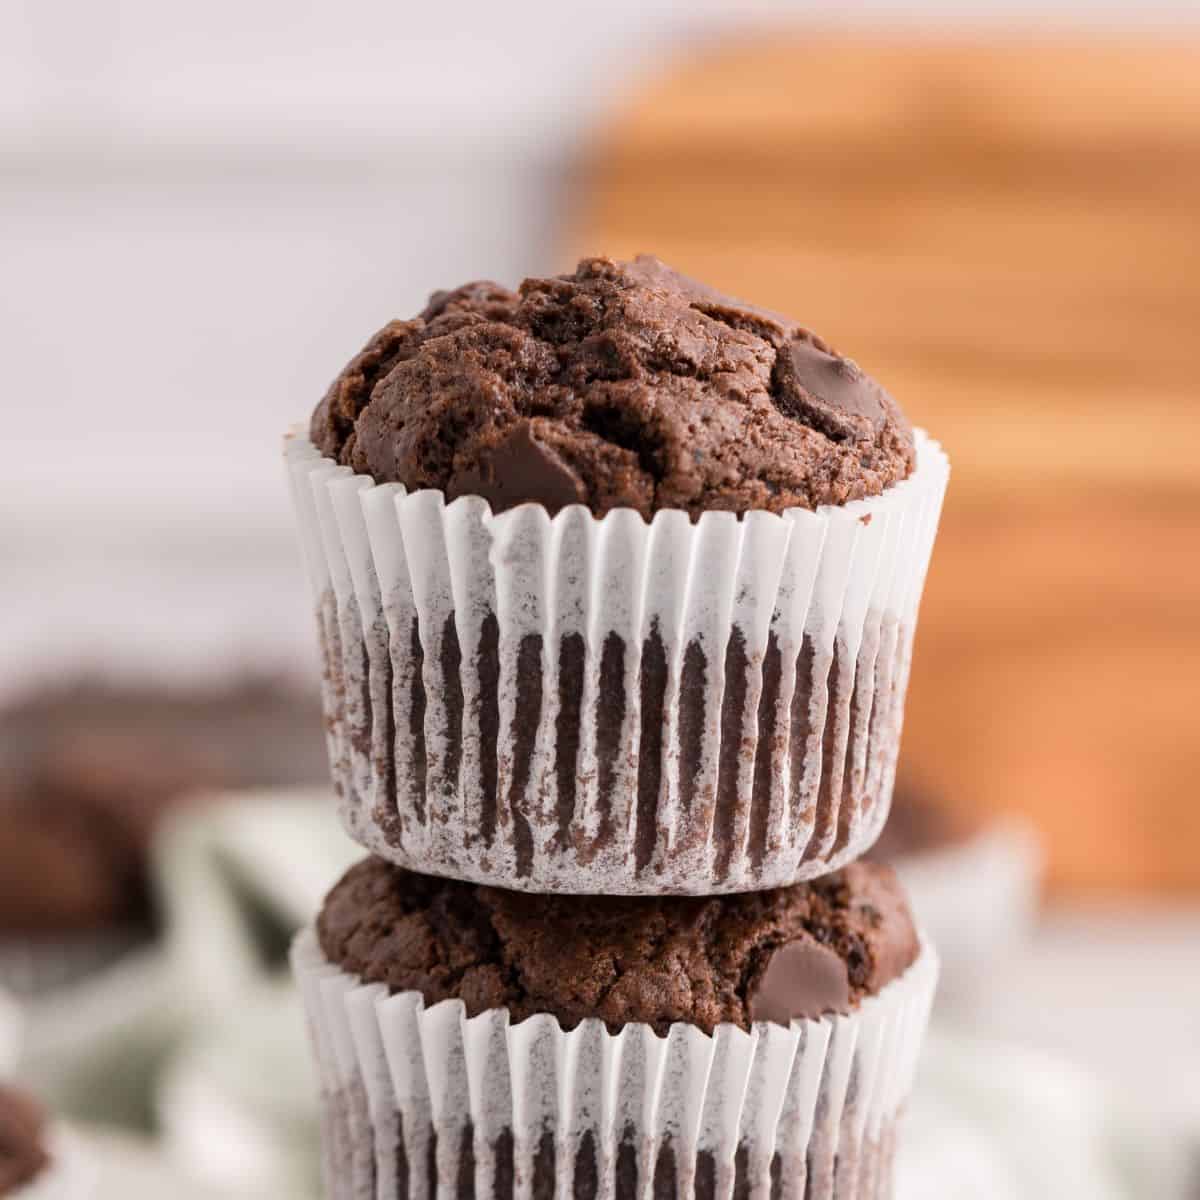 Sugar Free Chocolate Chocolate Chip Muffins (double chocolate), a simple and decadent recipe that is perfect for breakfast, brunch, or snacking on. Keto option.